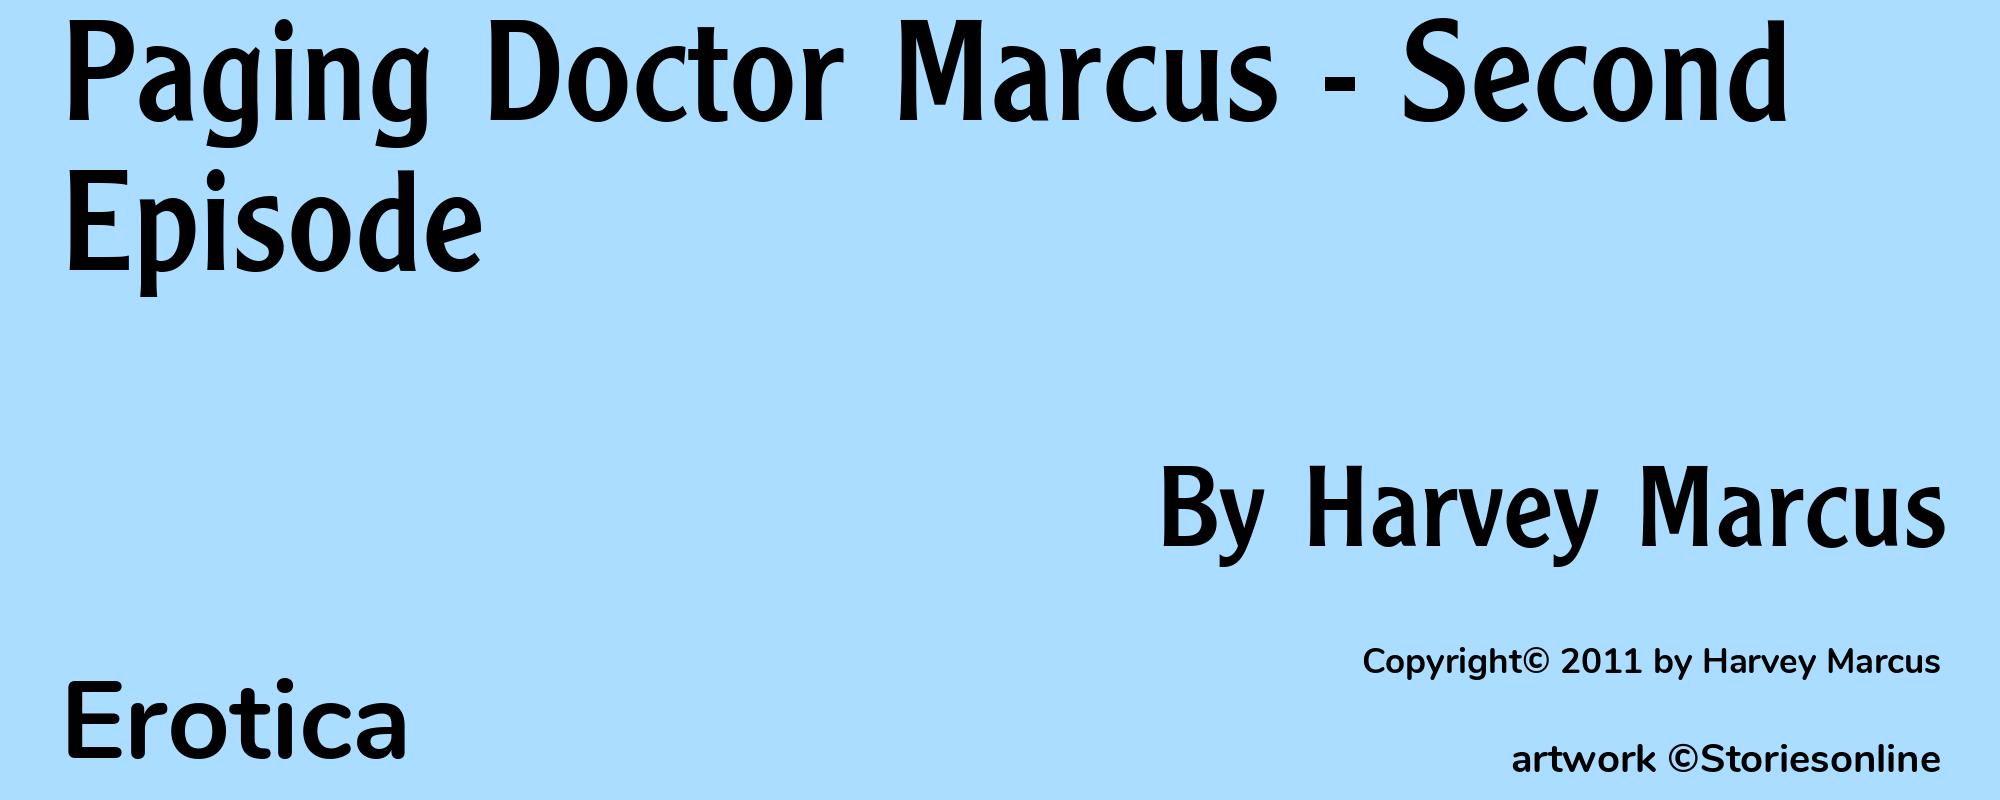 Paging Doctor Marcus - Second Episode - Cover